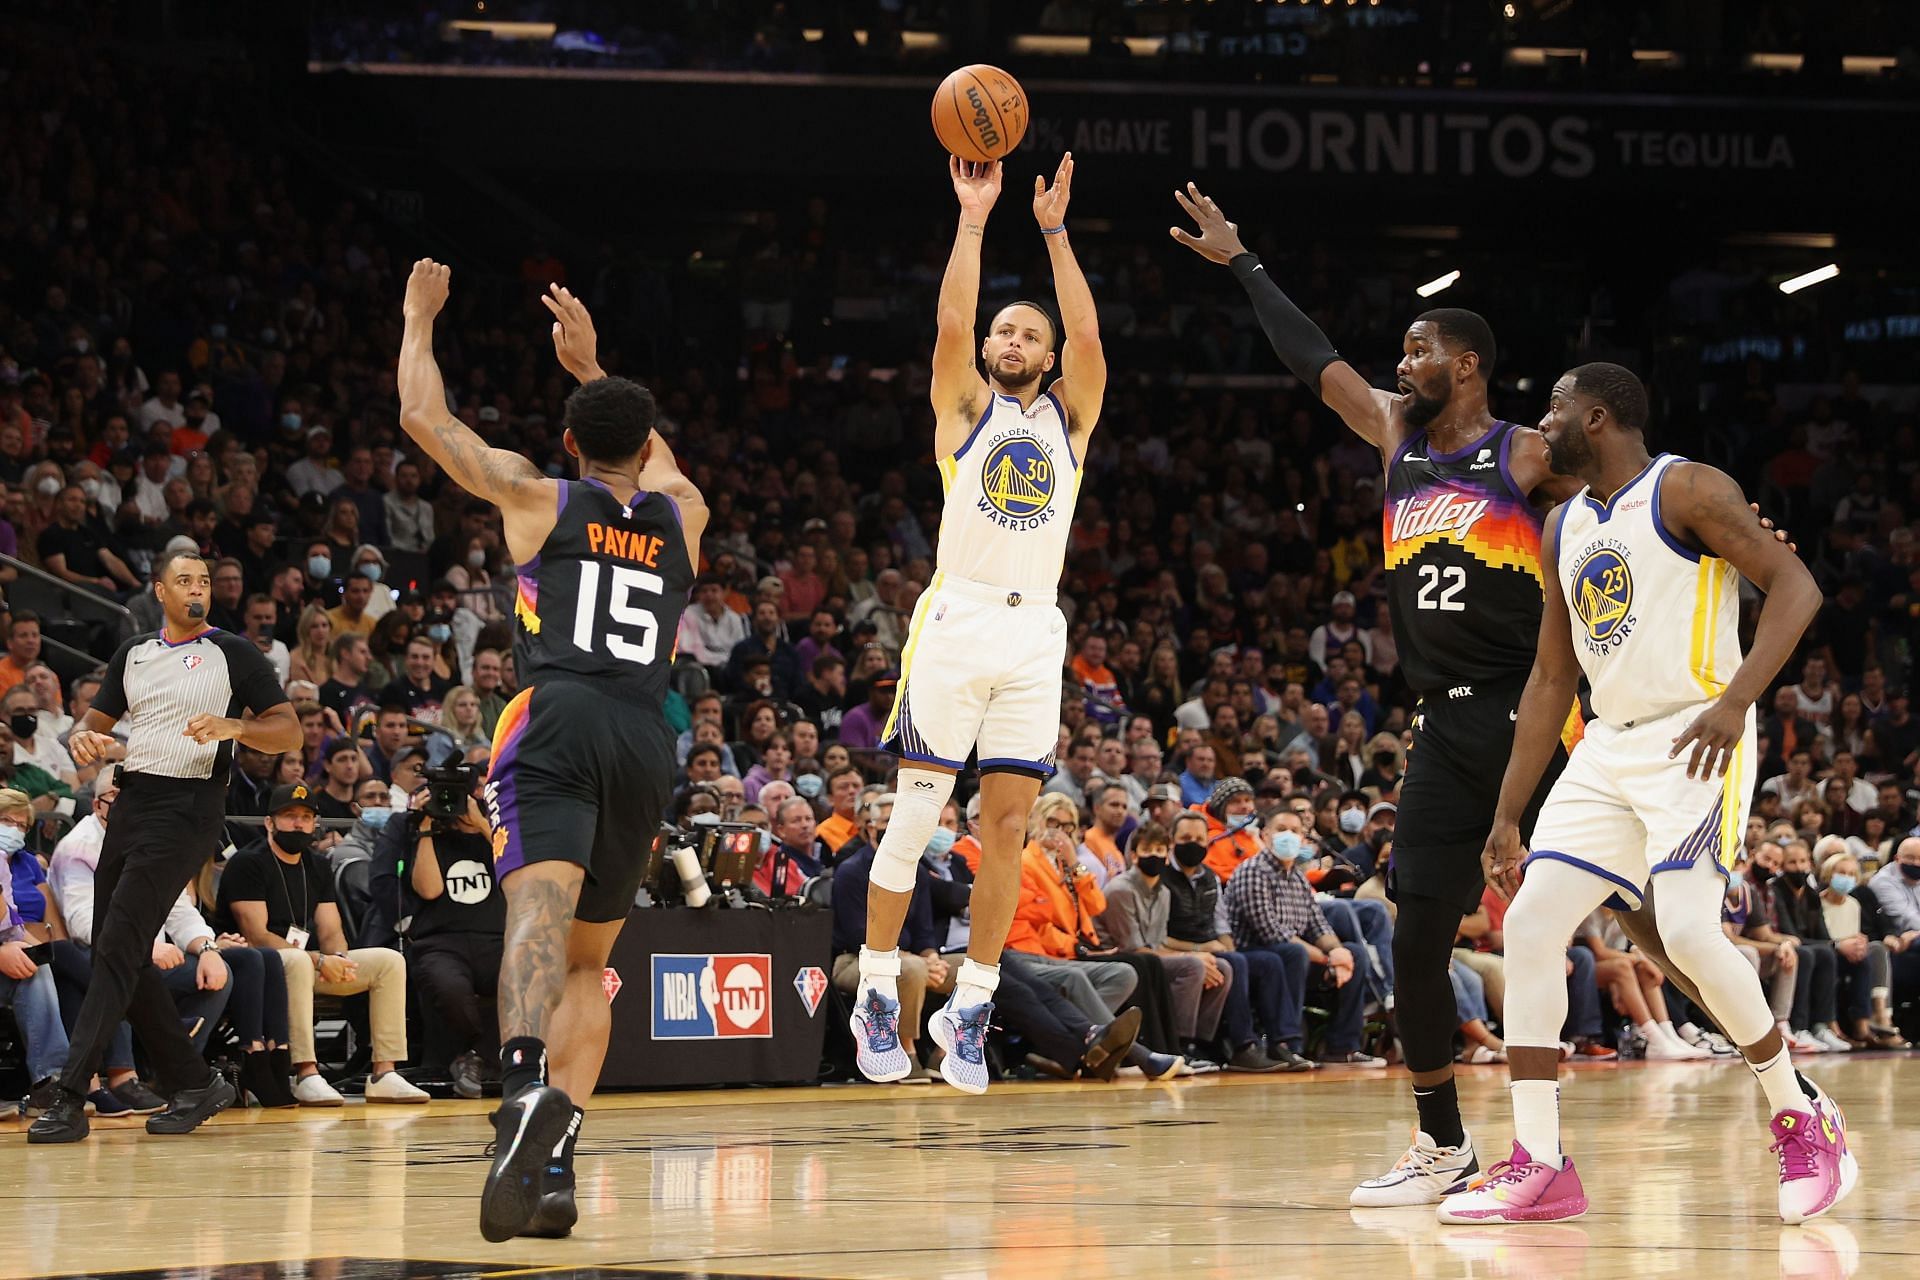 Steph Curry attempts a jump shot against the Phoenix Suns